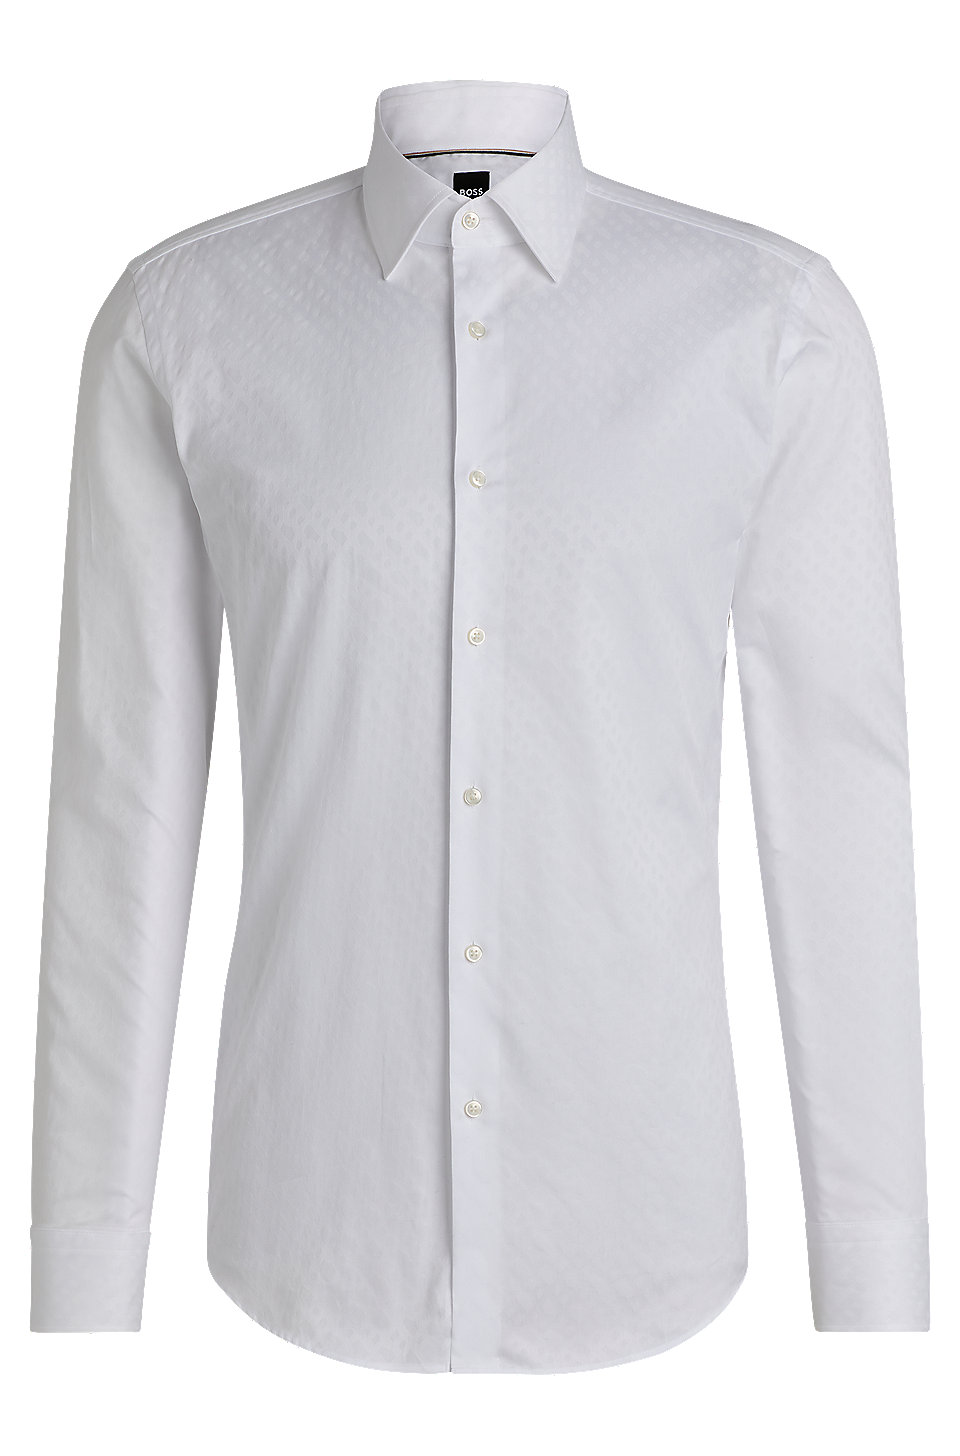 BOSS - Slim-fit shirt in Italian cotton with jacquard monograms